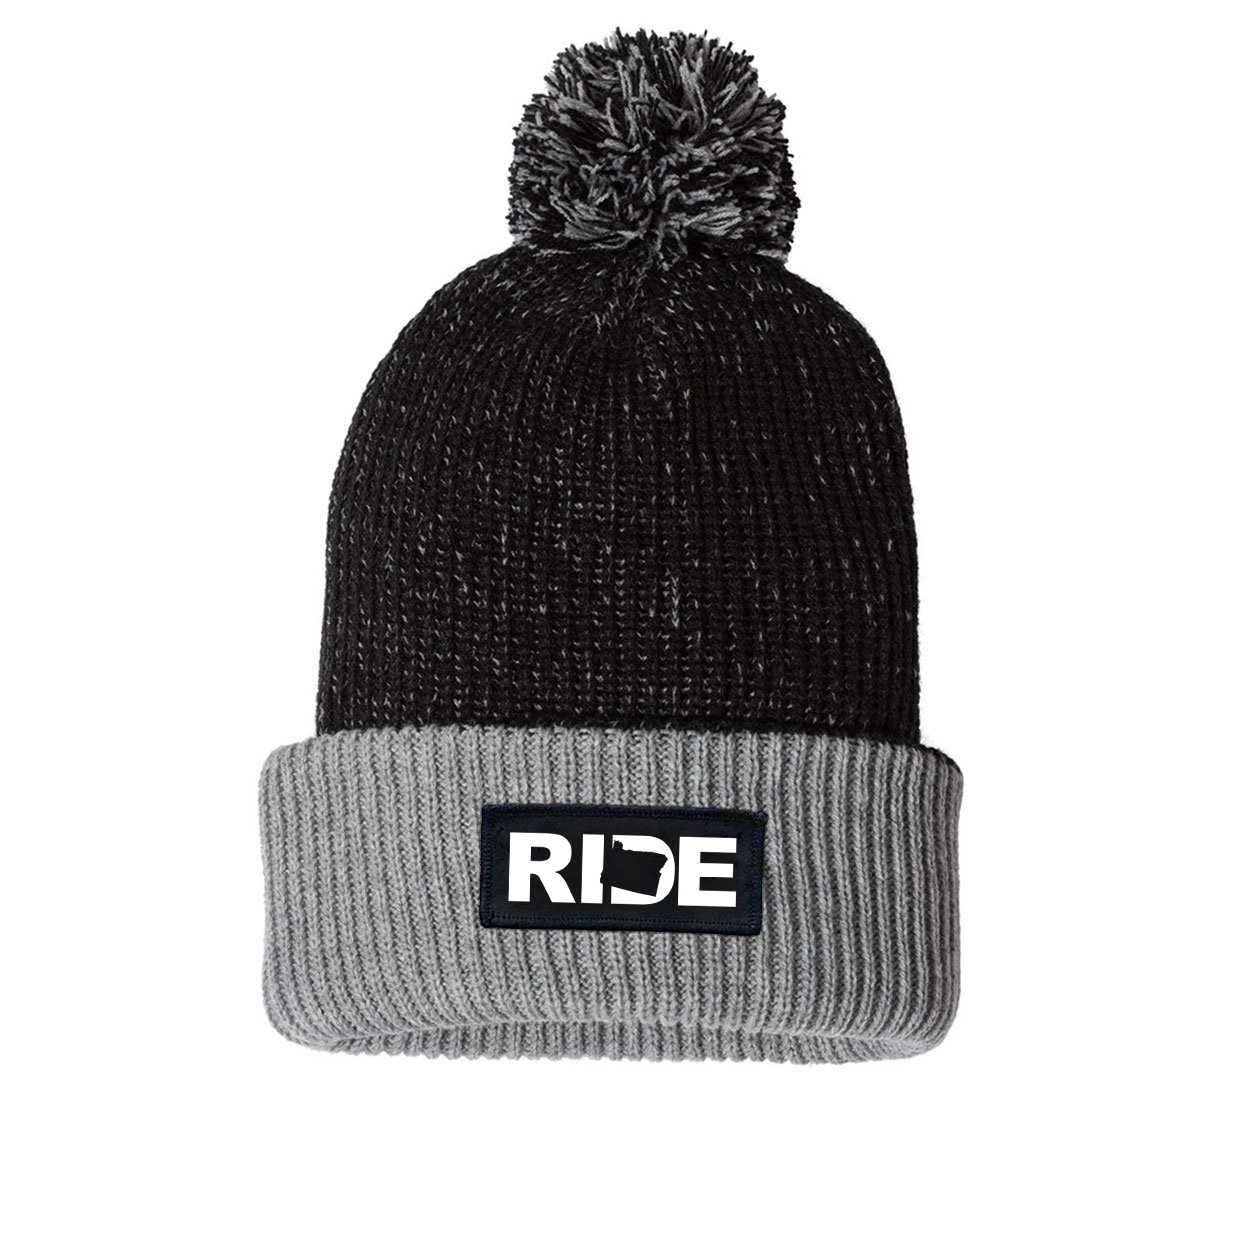 Ride Oregon Night Out Woven Patch Roll Up Pom Knit Beanie Black/Gray (White Logo)